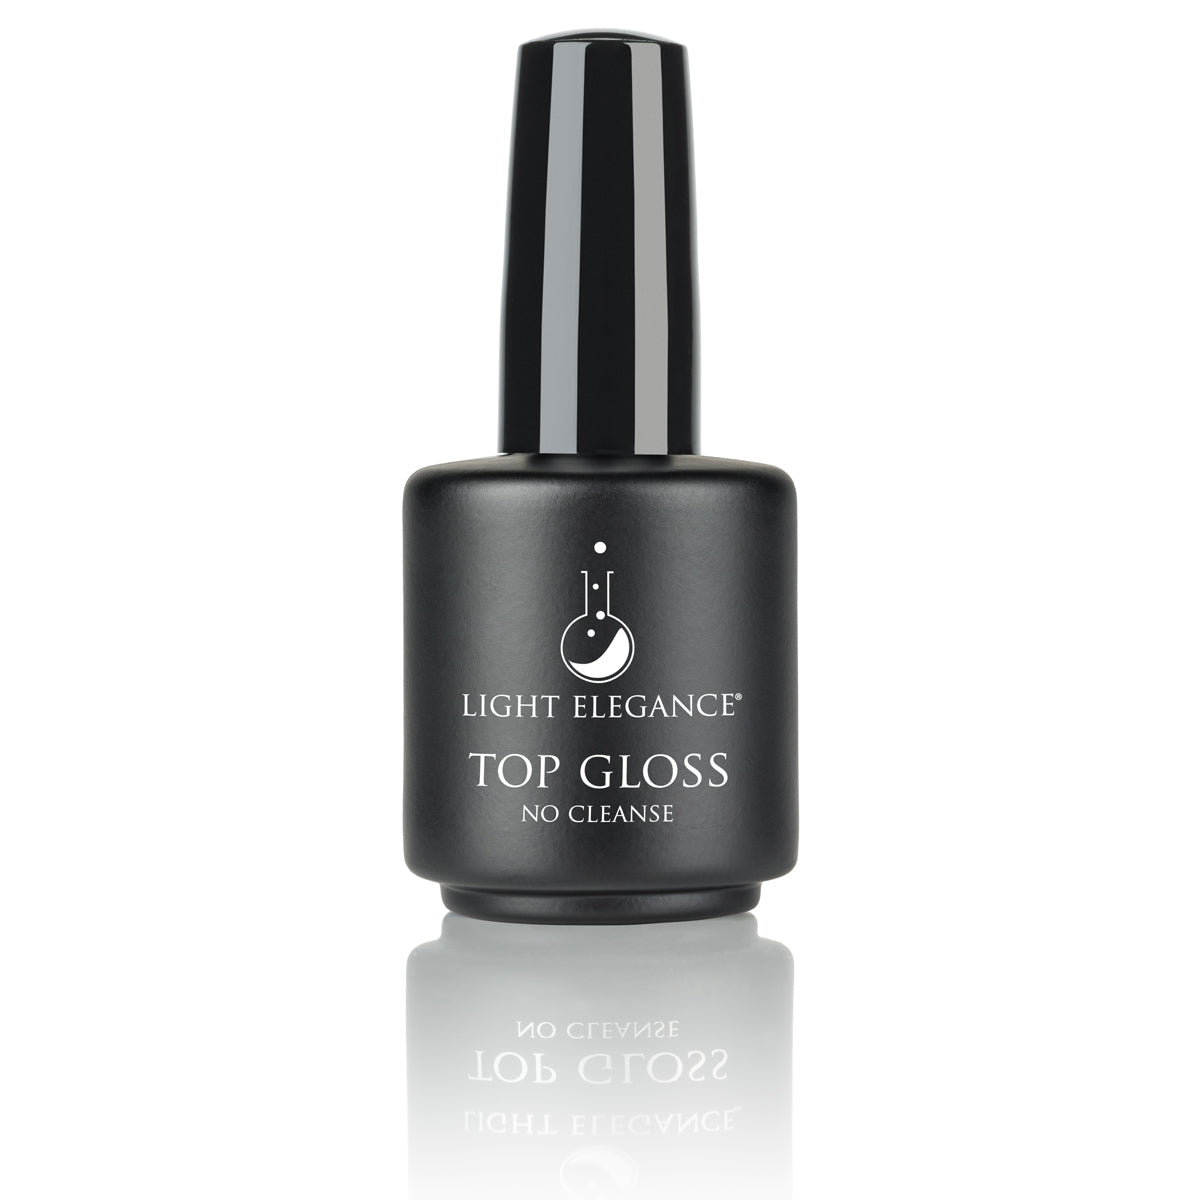 Top Gloss No Cleanse Top Coat